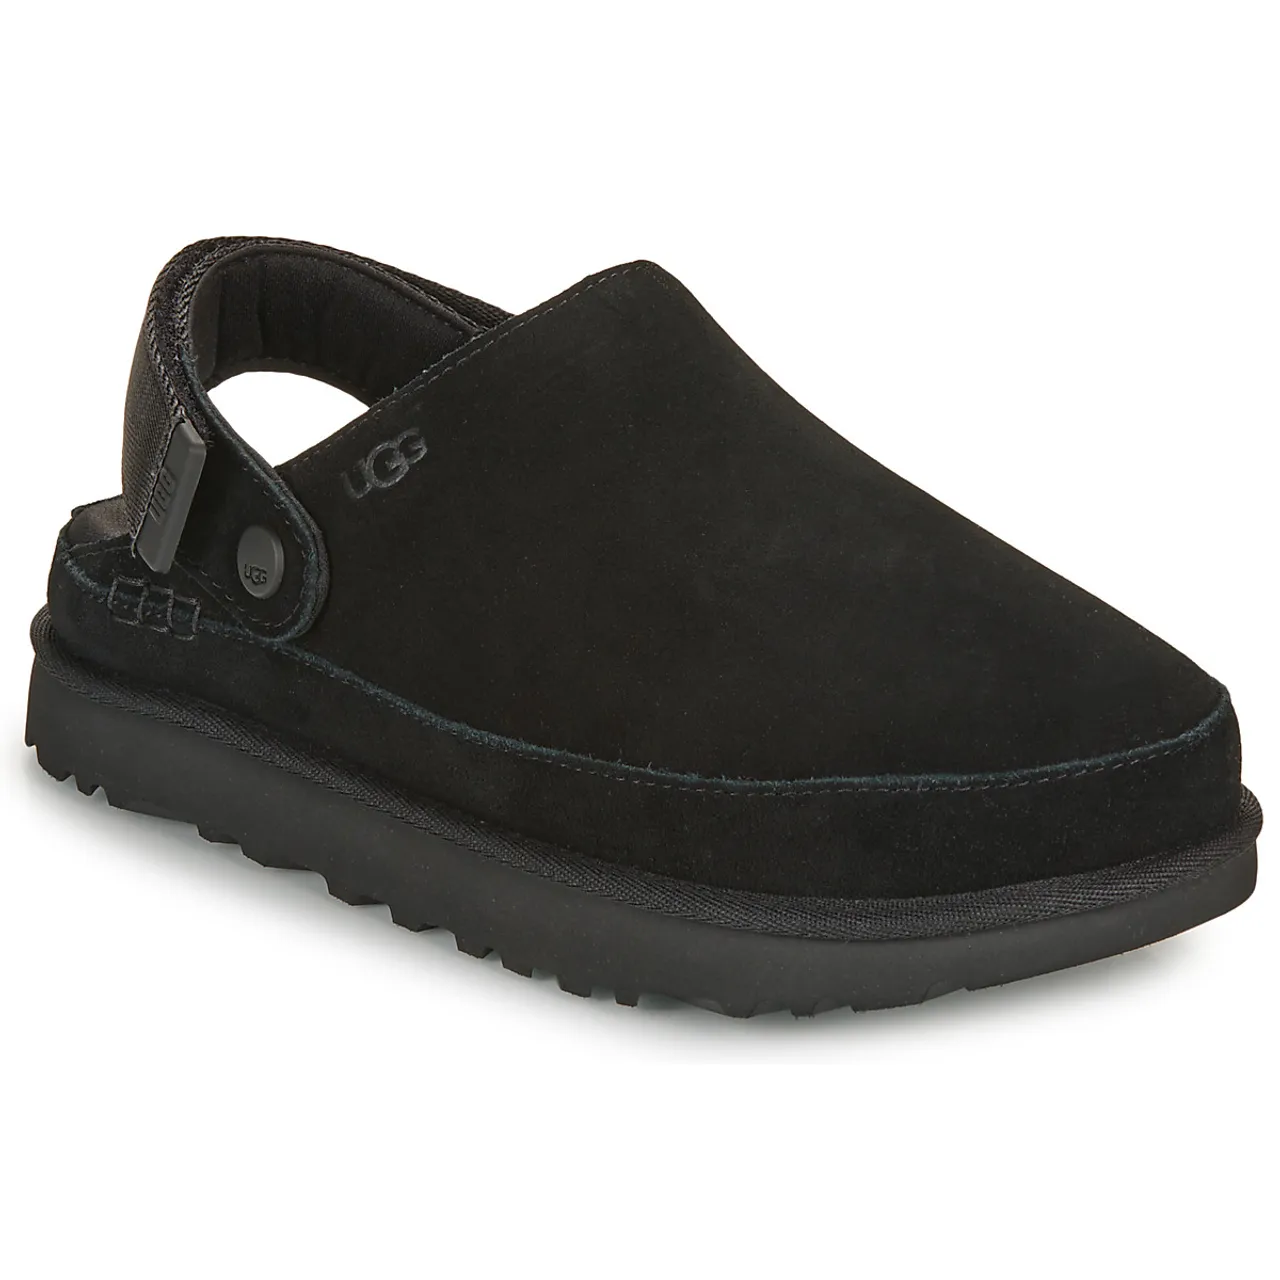 UGG  GOLDENSTAR CLOG  women's Mules / Casual Shoes in Black